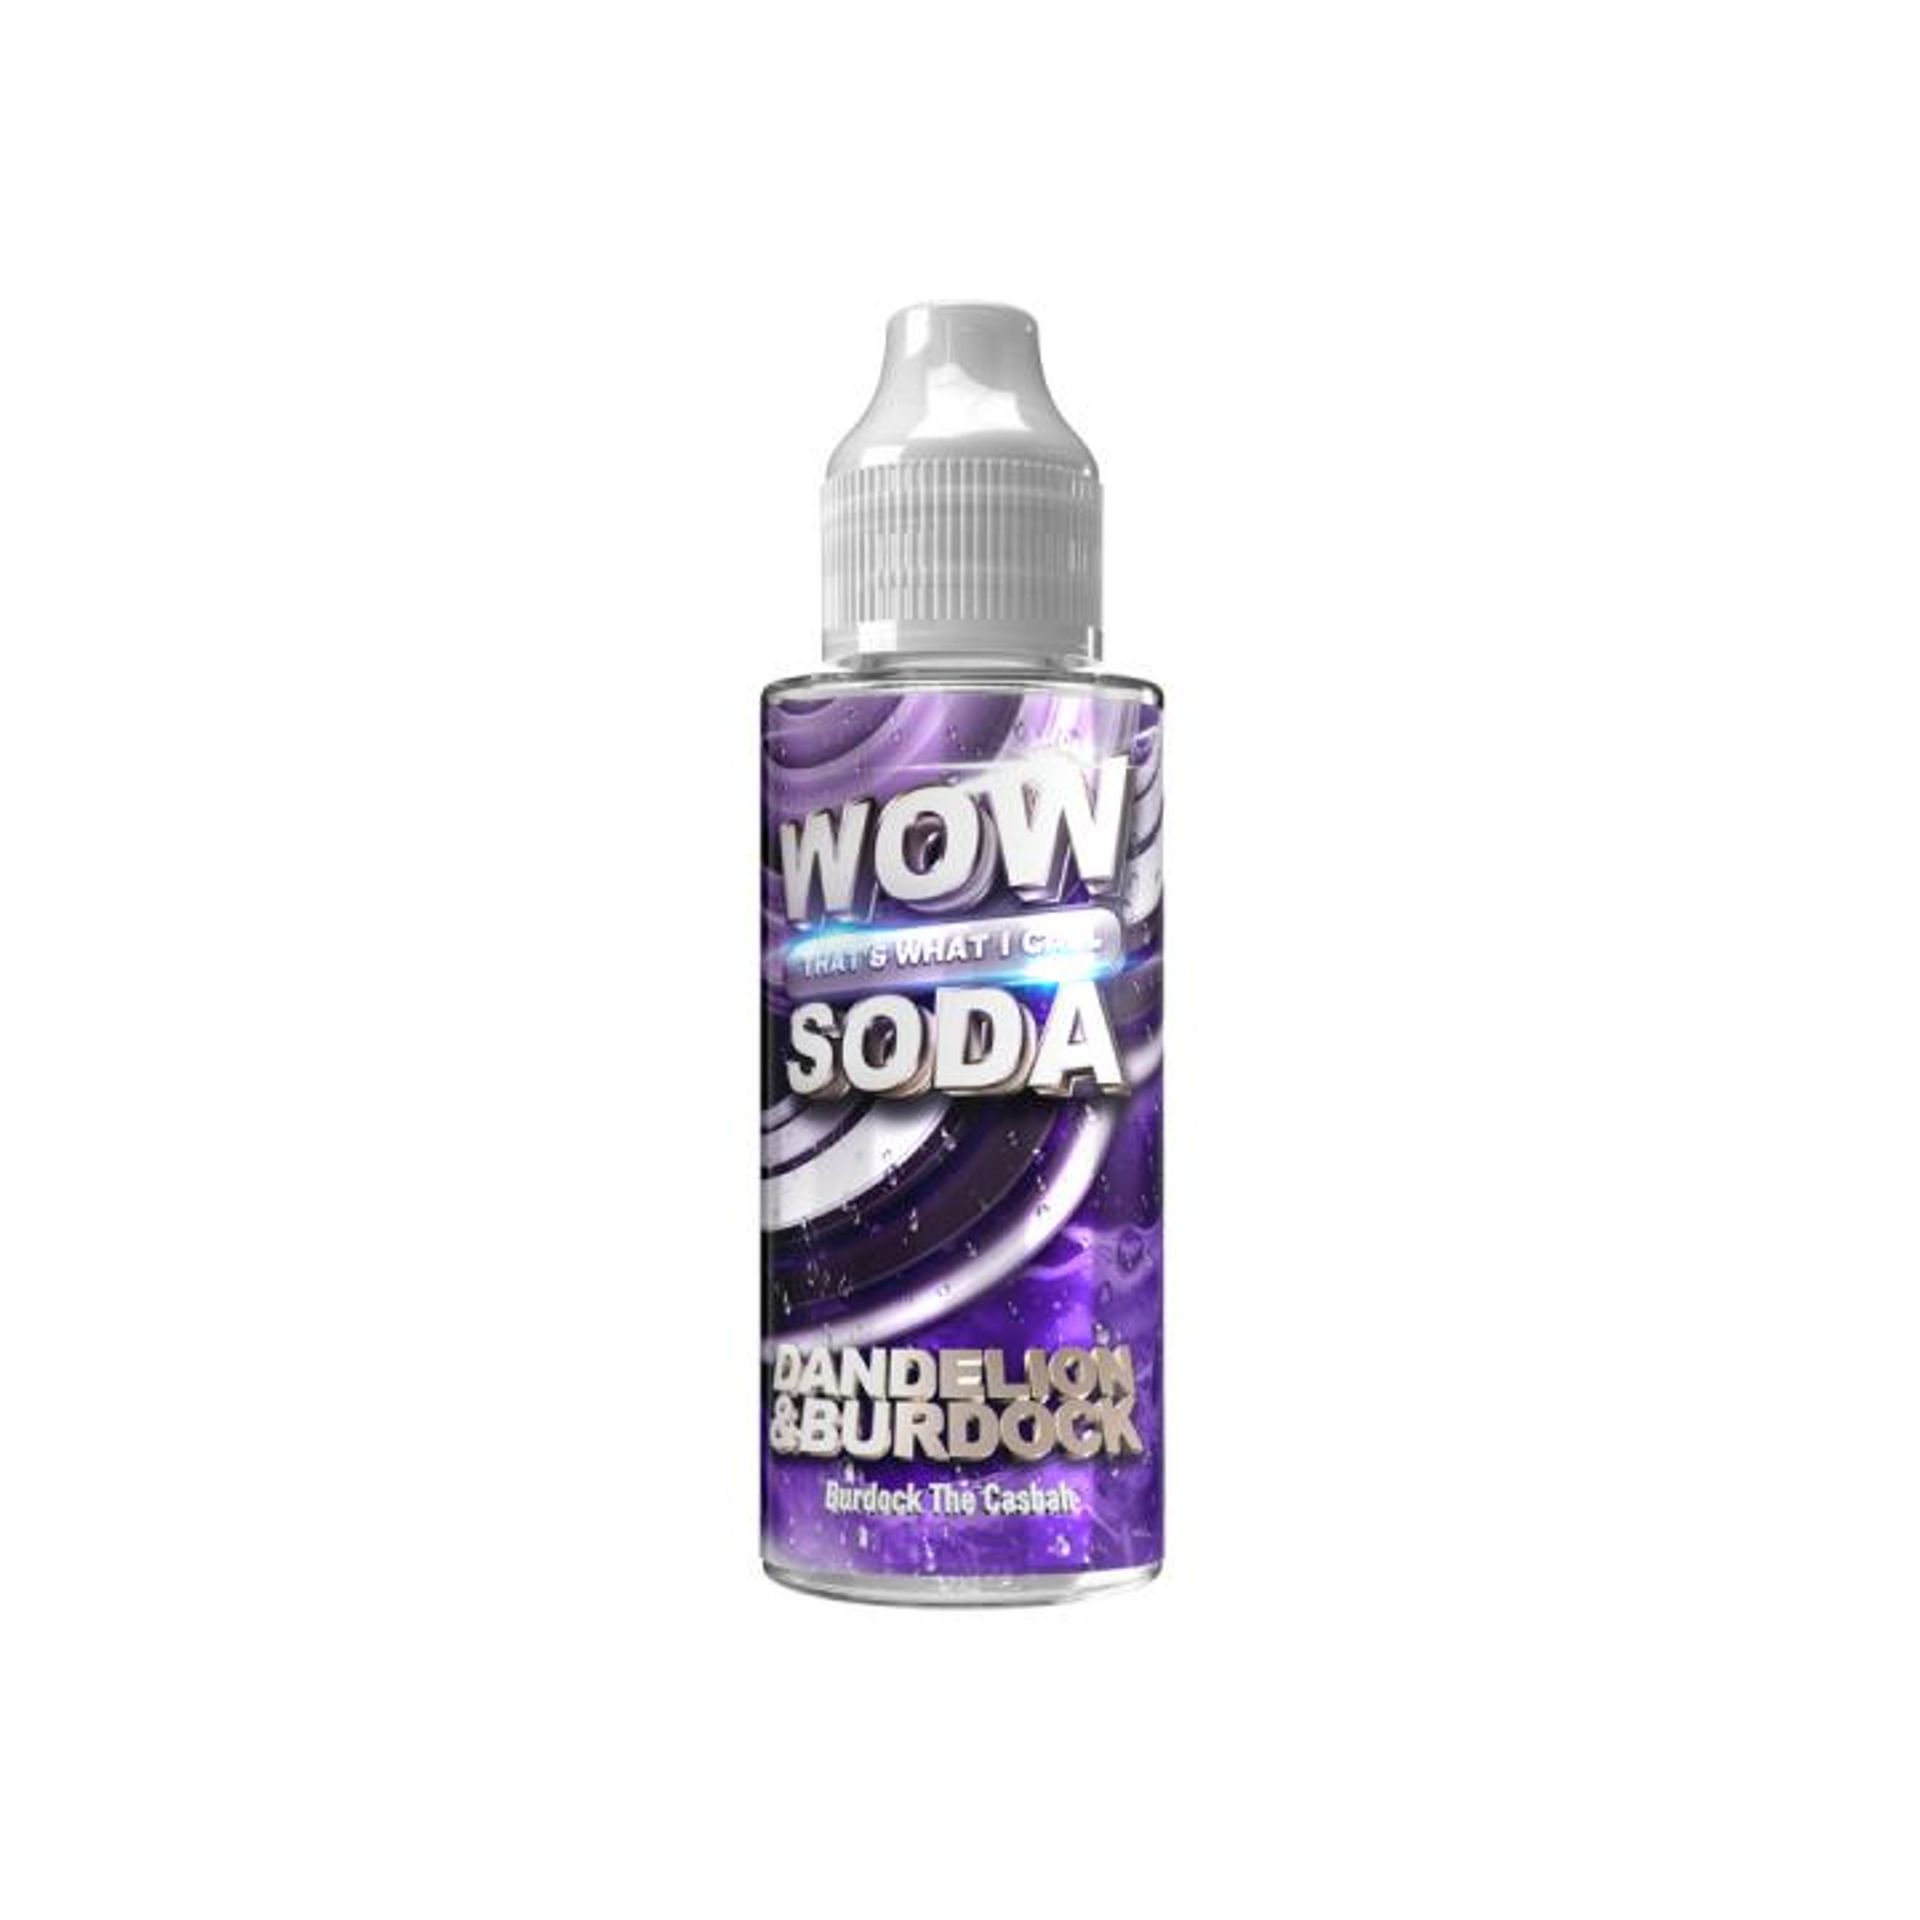 Image of Dandelion & Burdock by Wow Thats What I Call